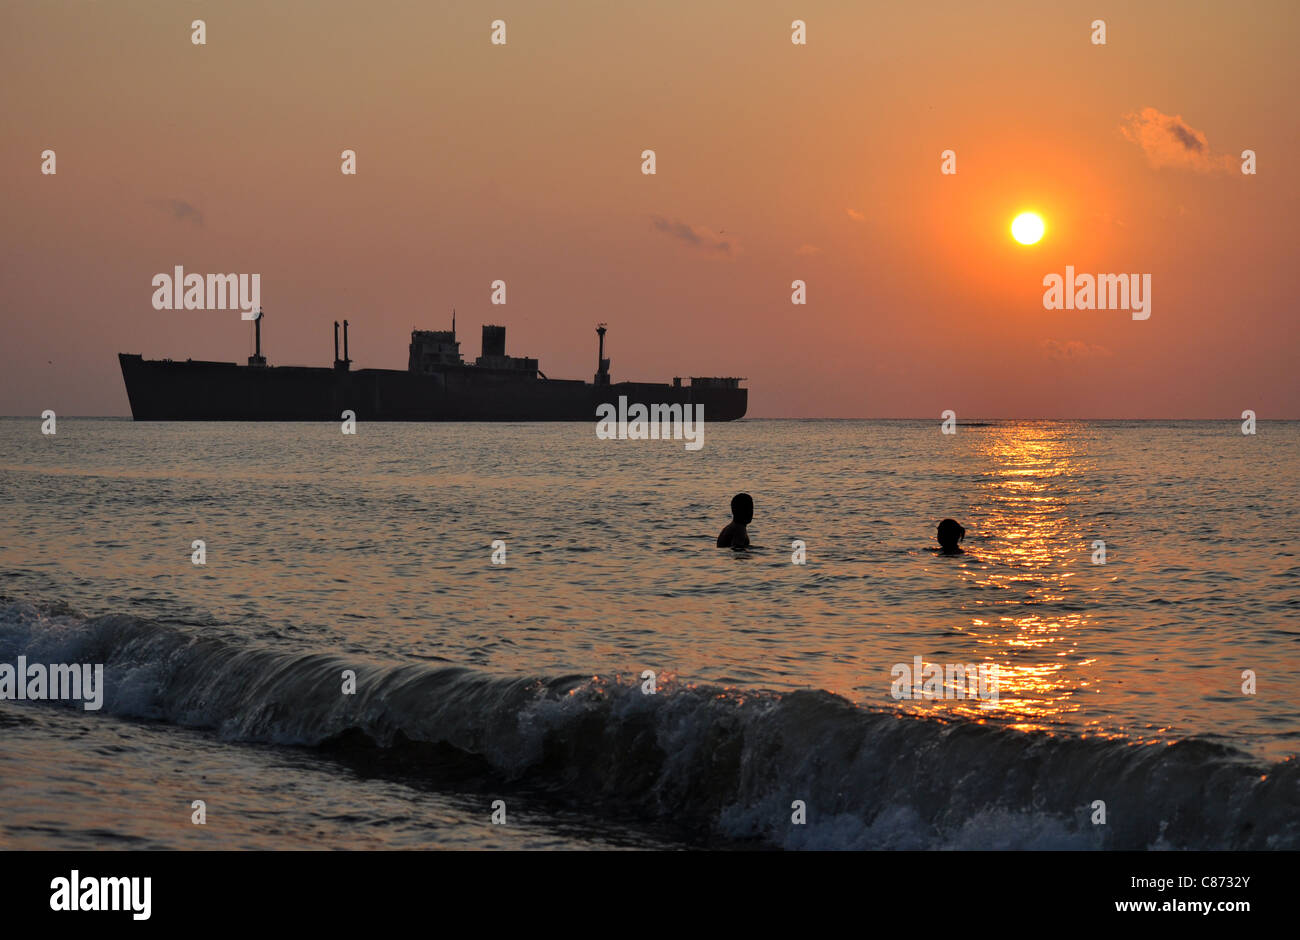 sunrise with a ship and swimmers, crock silhouette Stock Photo